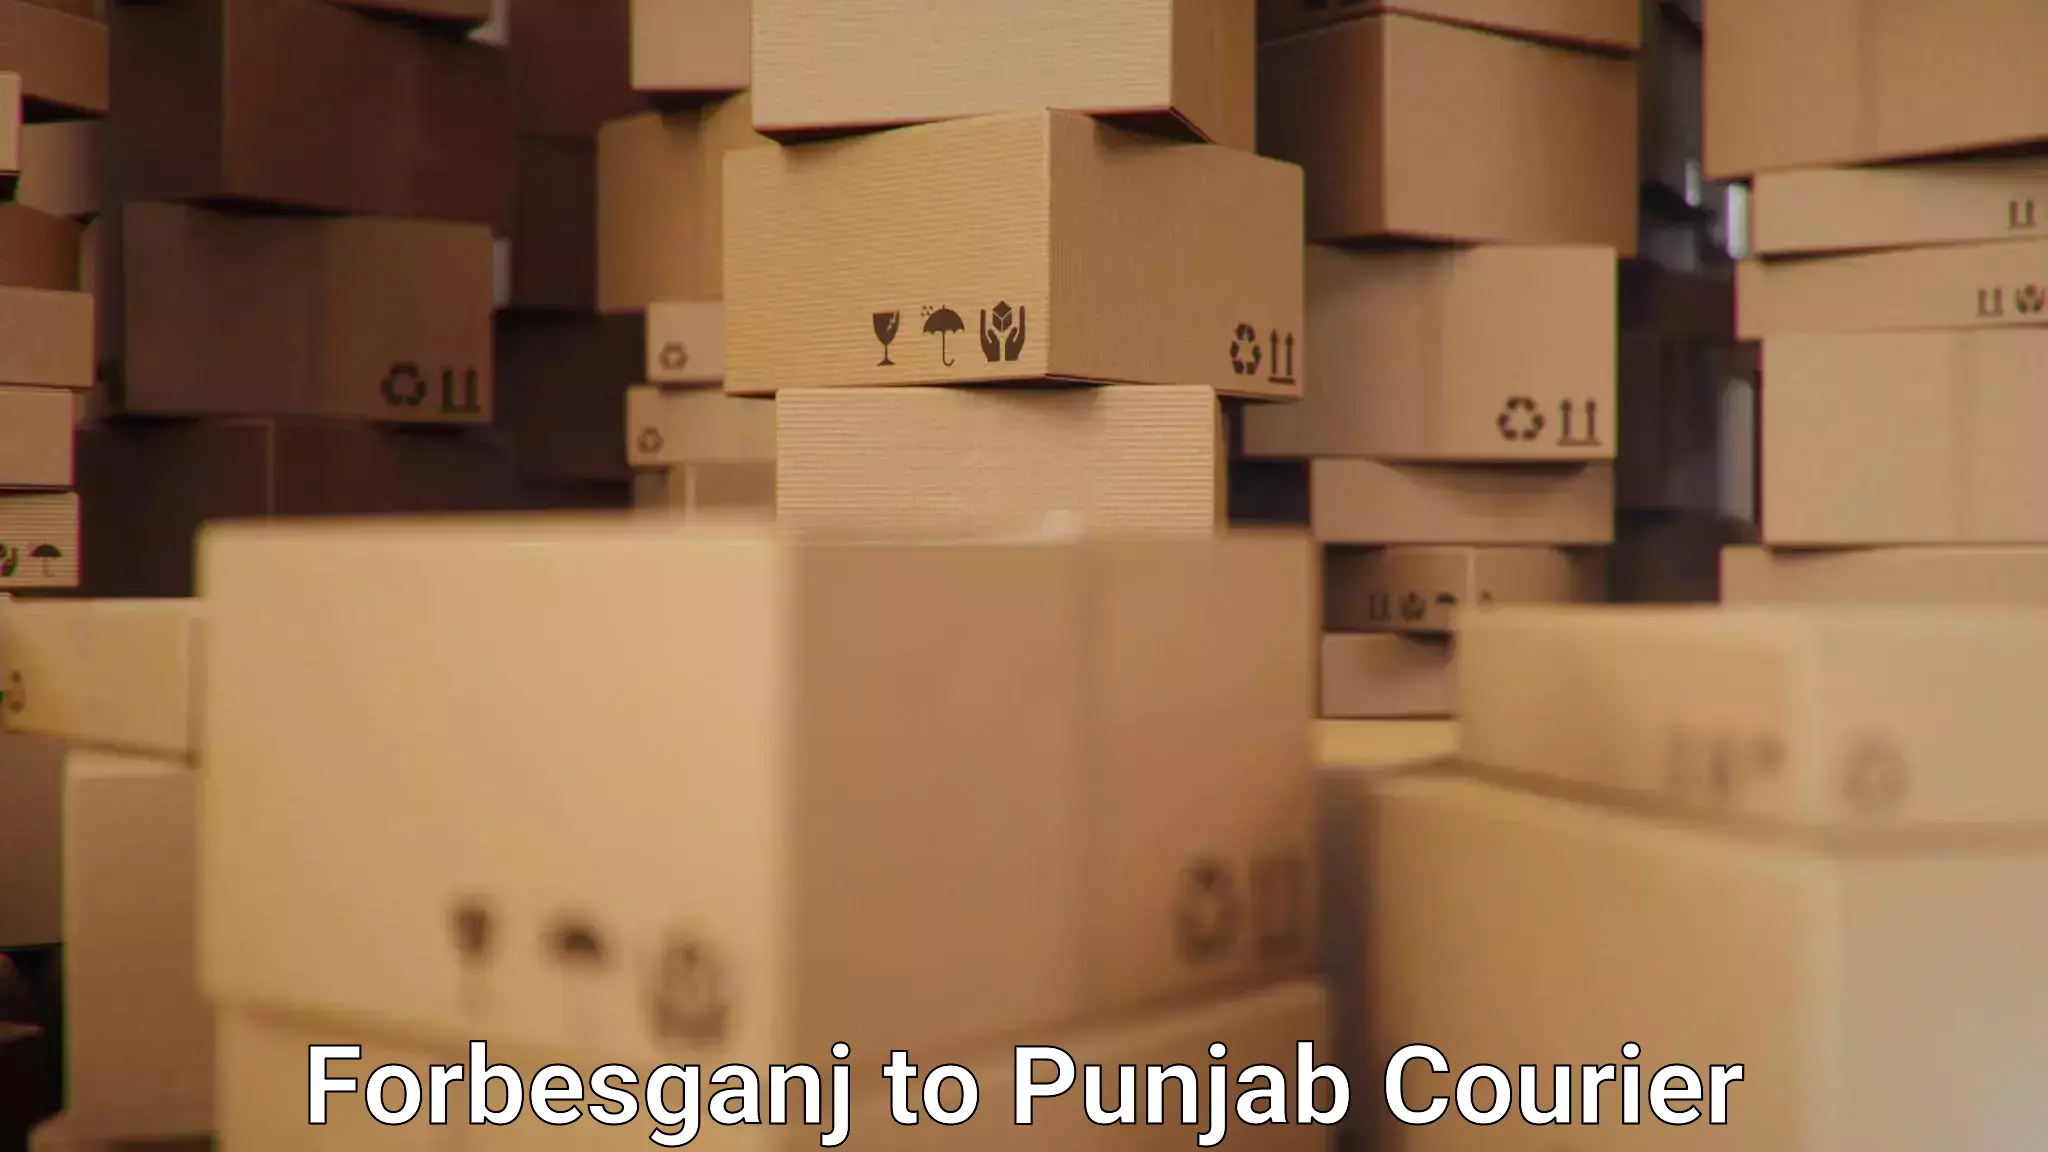 Courier rate comparison Forbesganj to Patiala